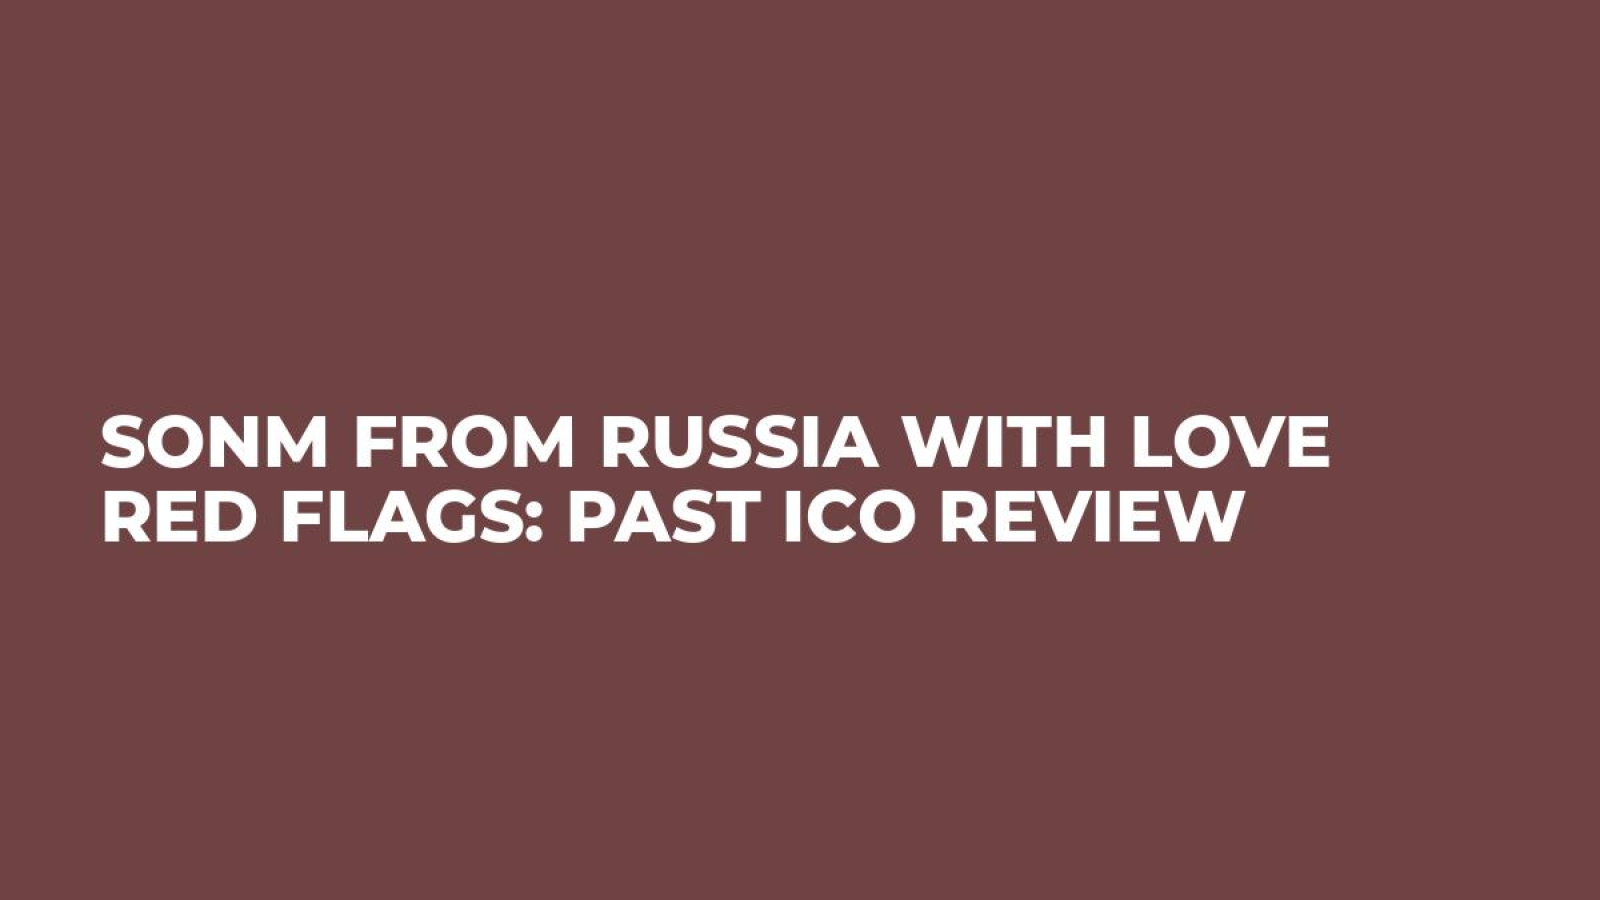 SONM From Russia with Love Red Flags: Past ICO Review